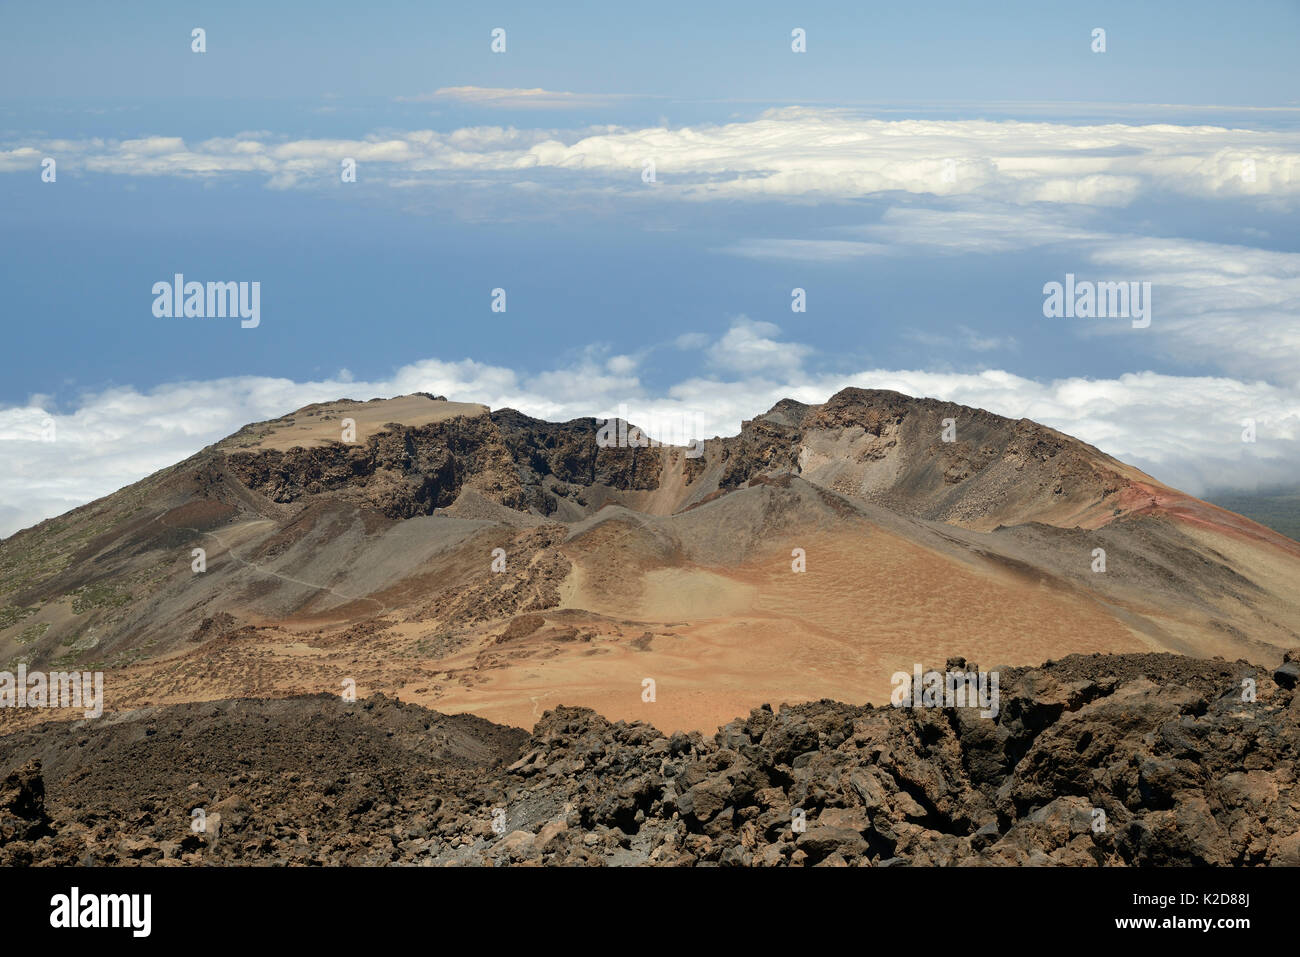 Old lava flows and summit of Pico Viejo Volcano viewed from Mount Teide, with masses of pumice deposits around the crater, Tenerife, May 2014. Stock Photo